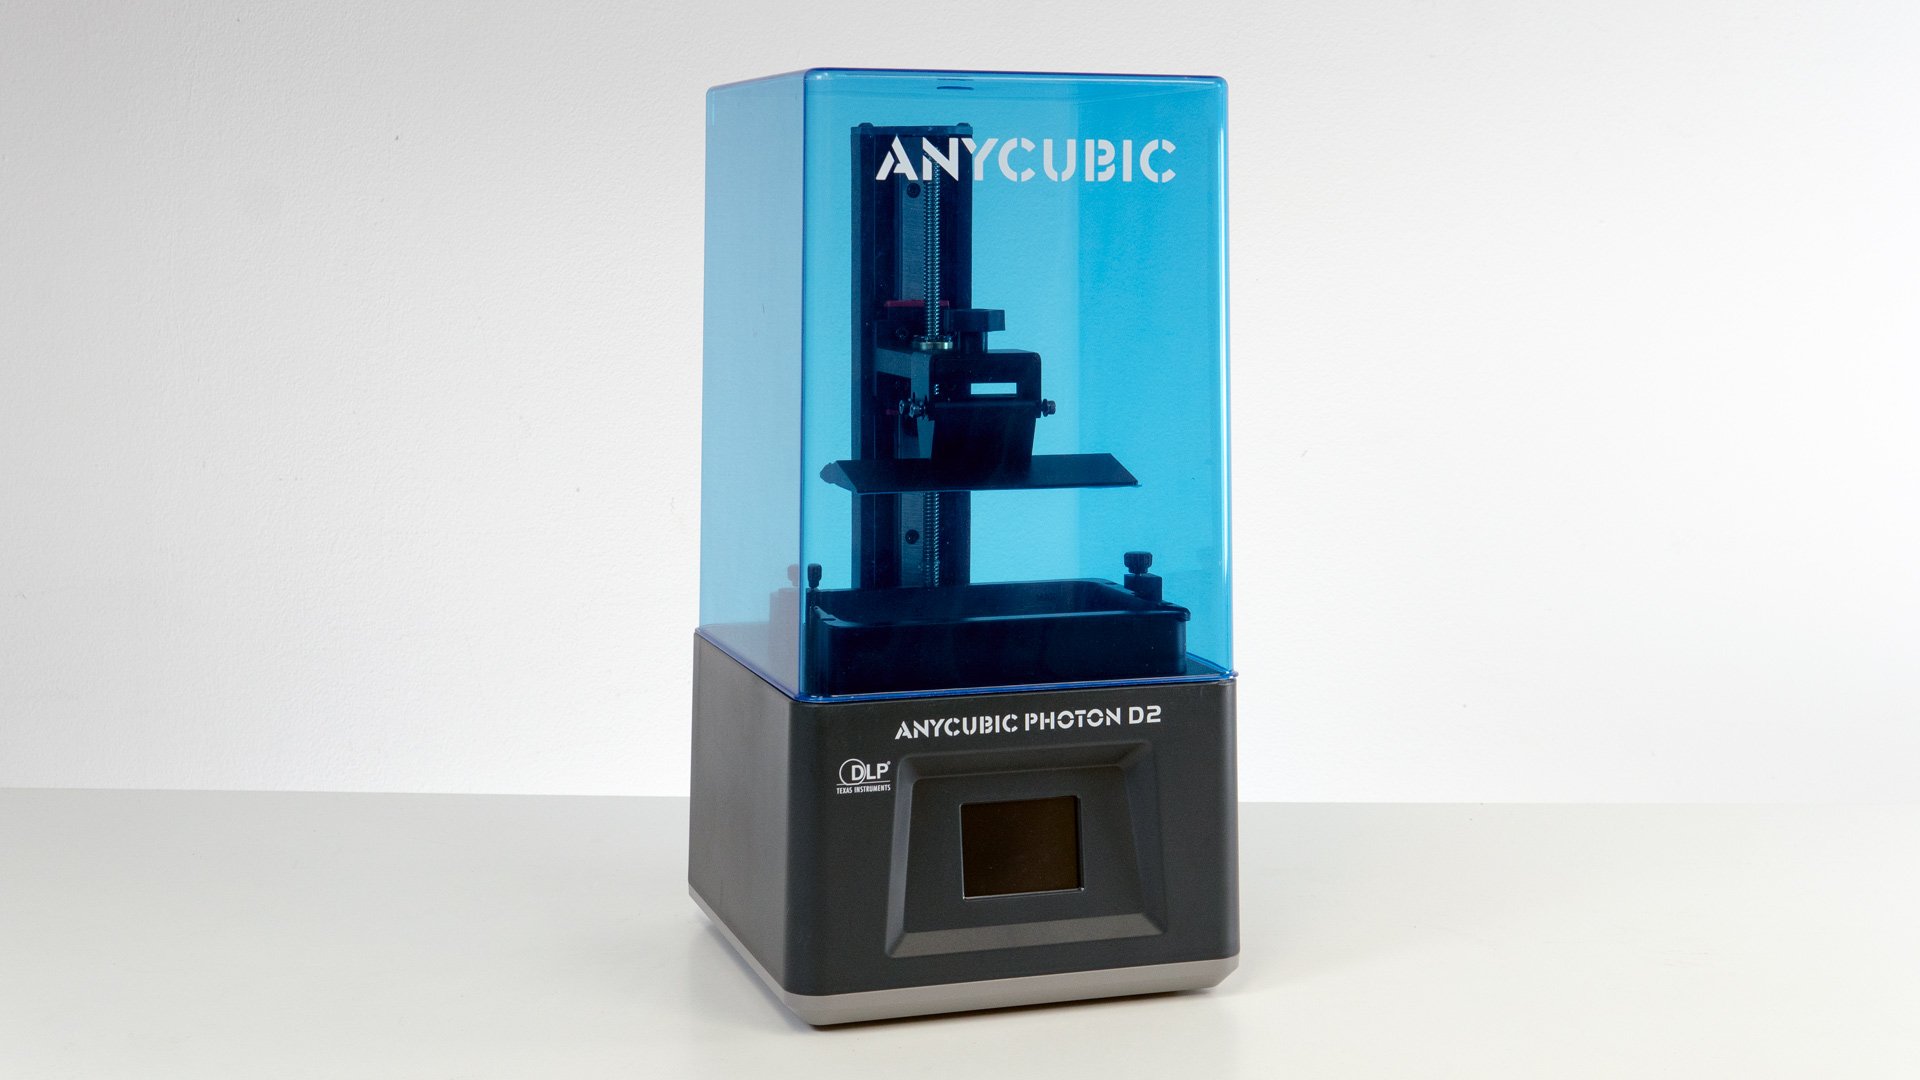 Anycubic Photon D2 - Consumer DLP 3D Printer – ANYCUBIC-US